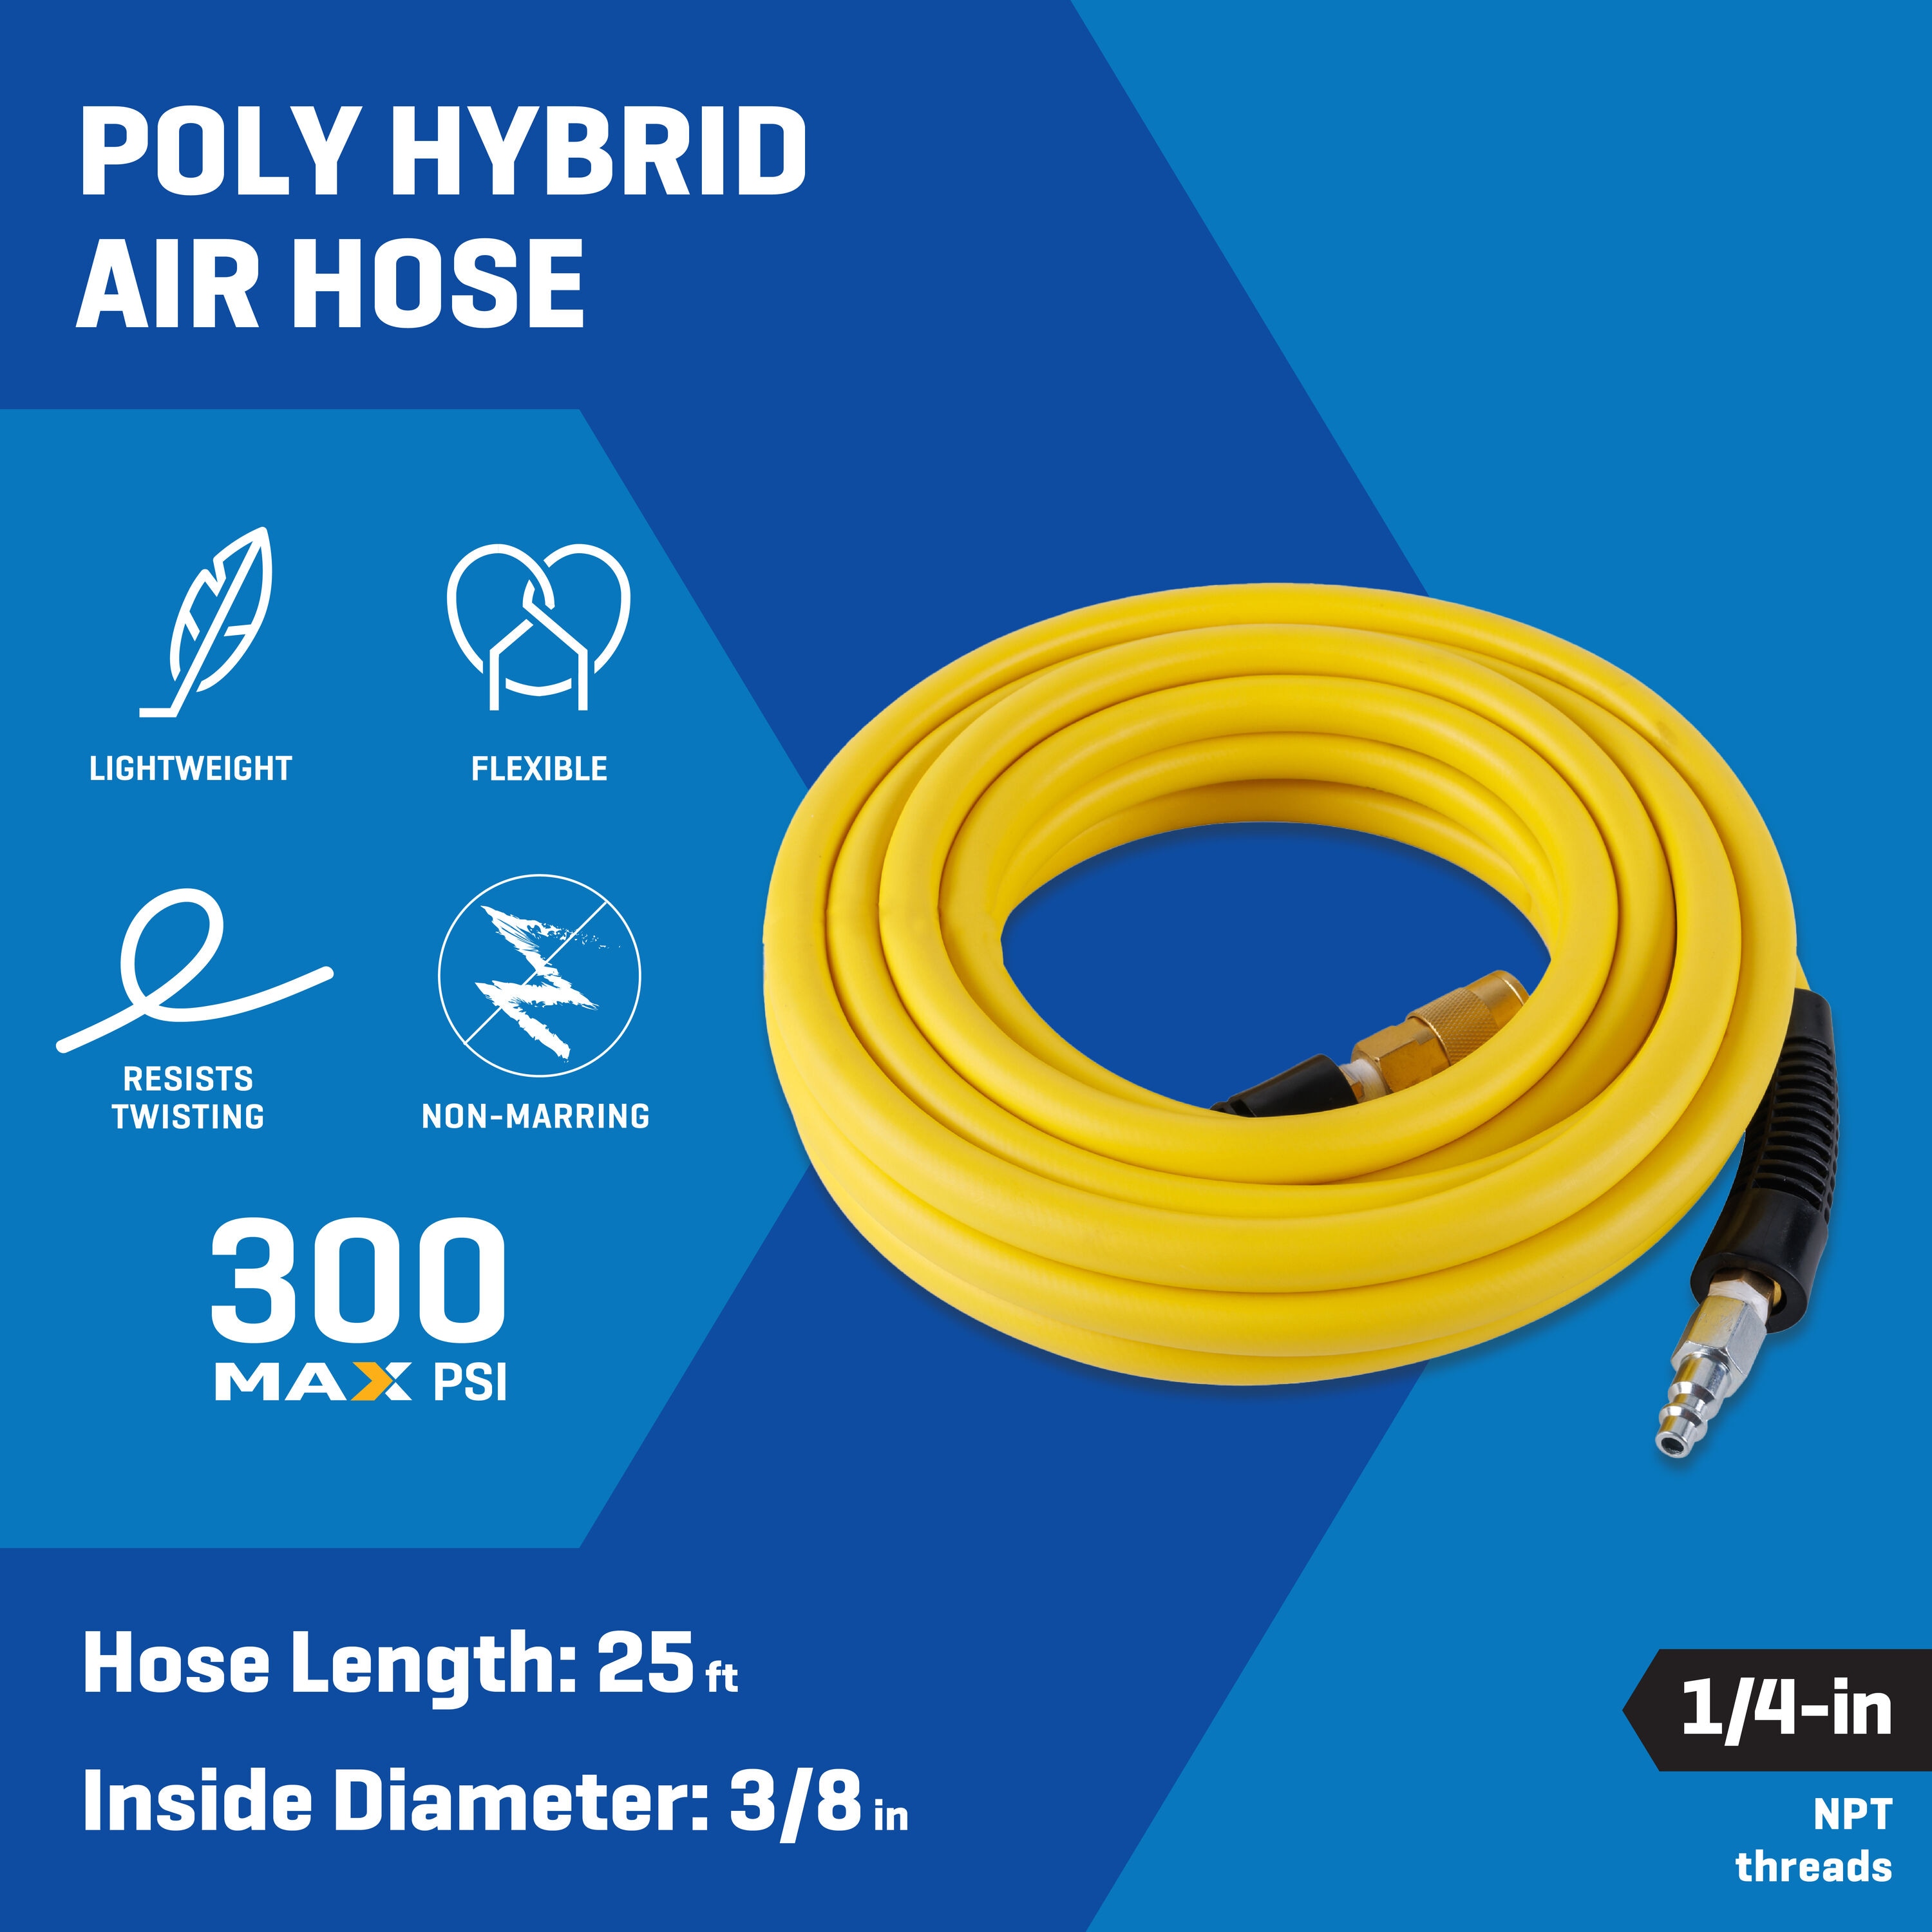 For use in cold weather conditions Air Compressor Hoses at